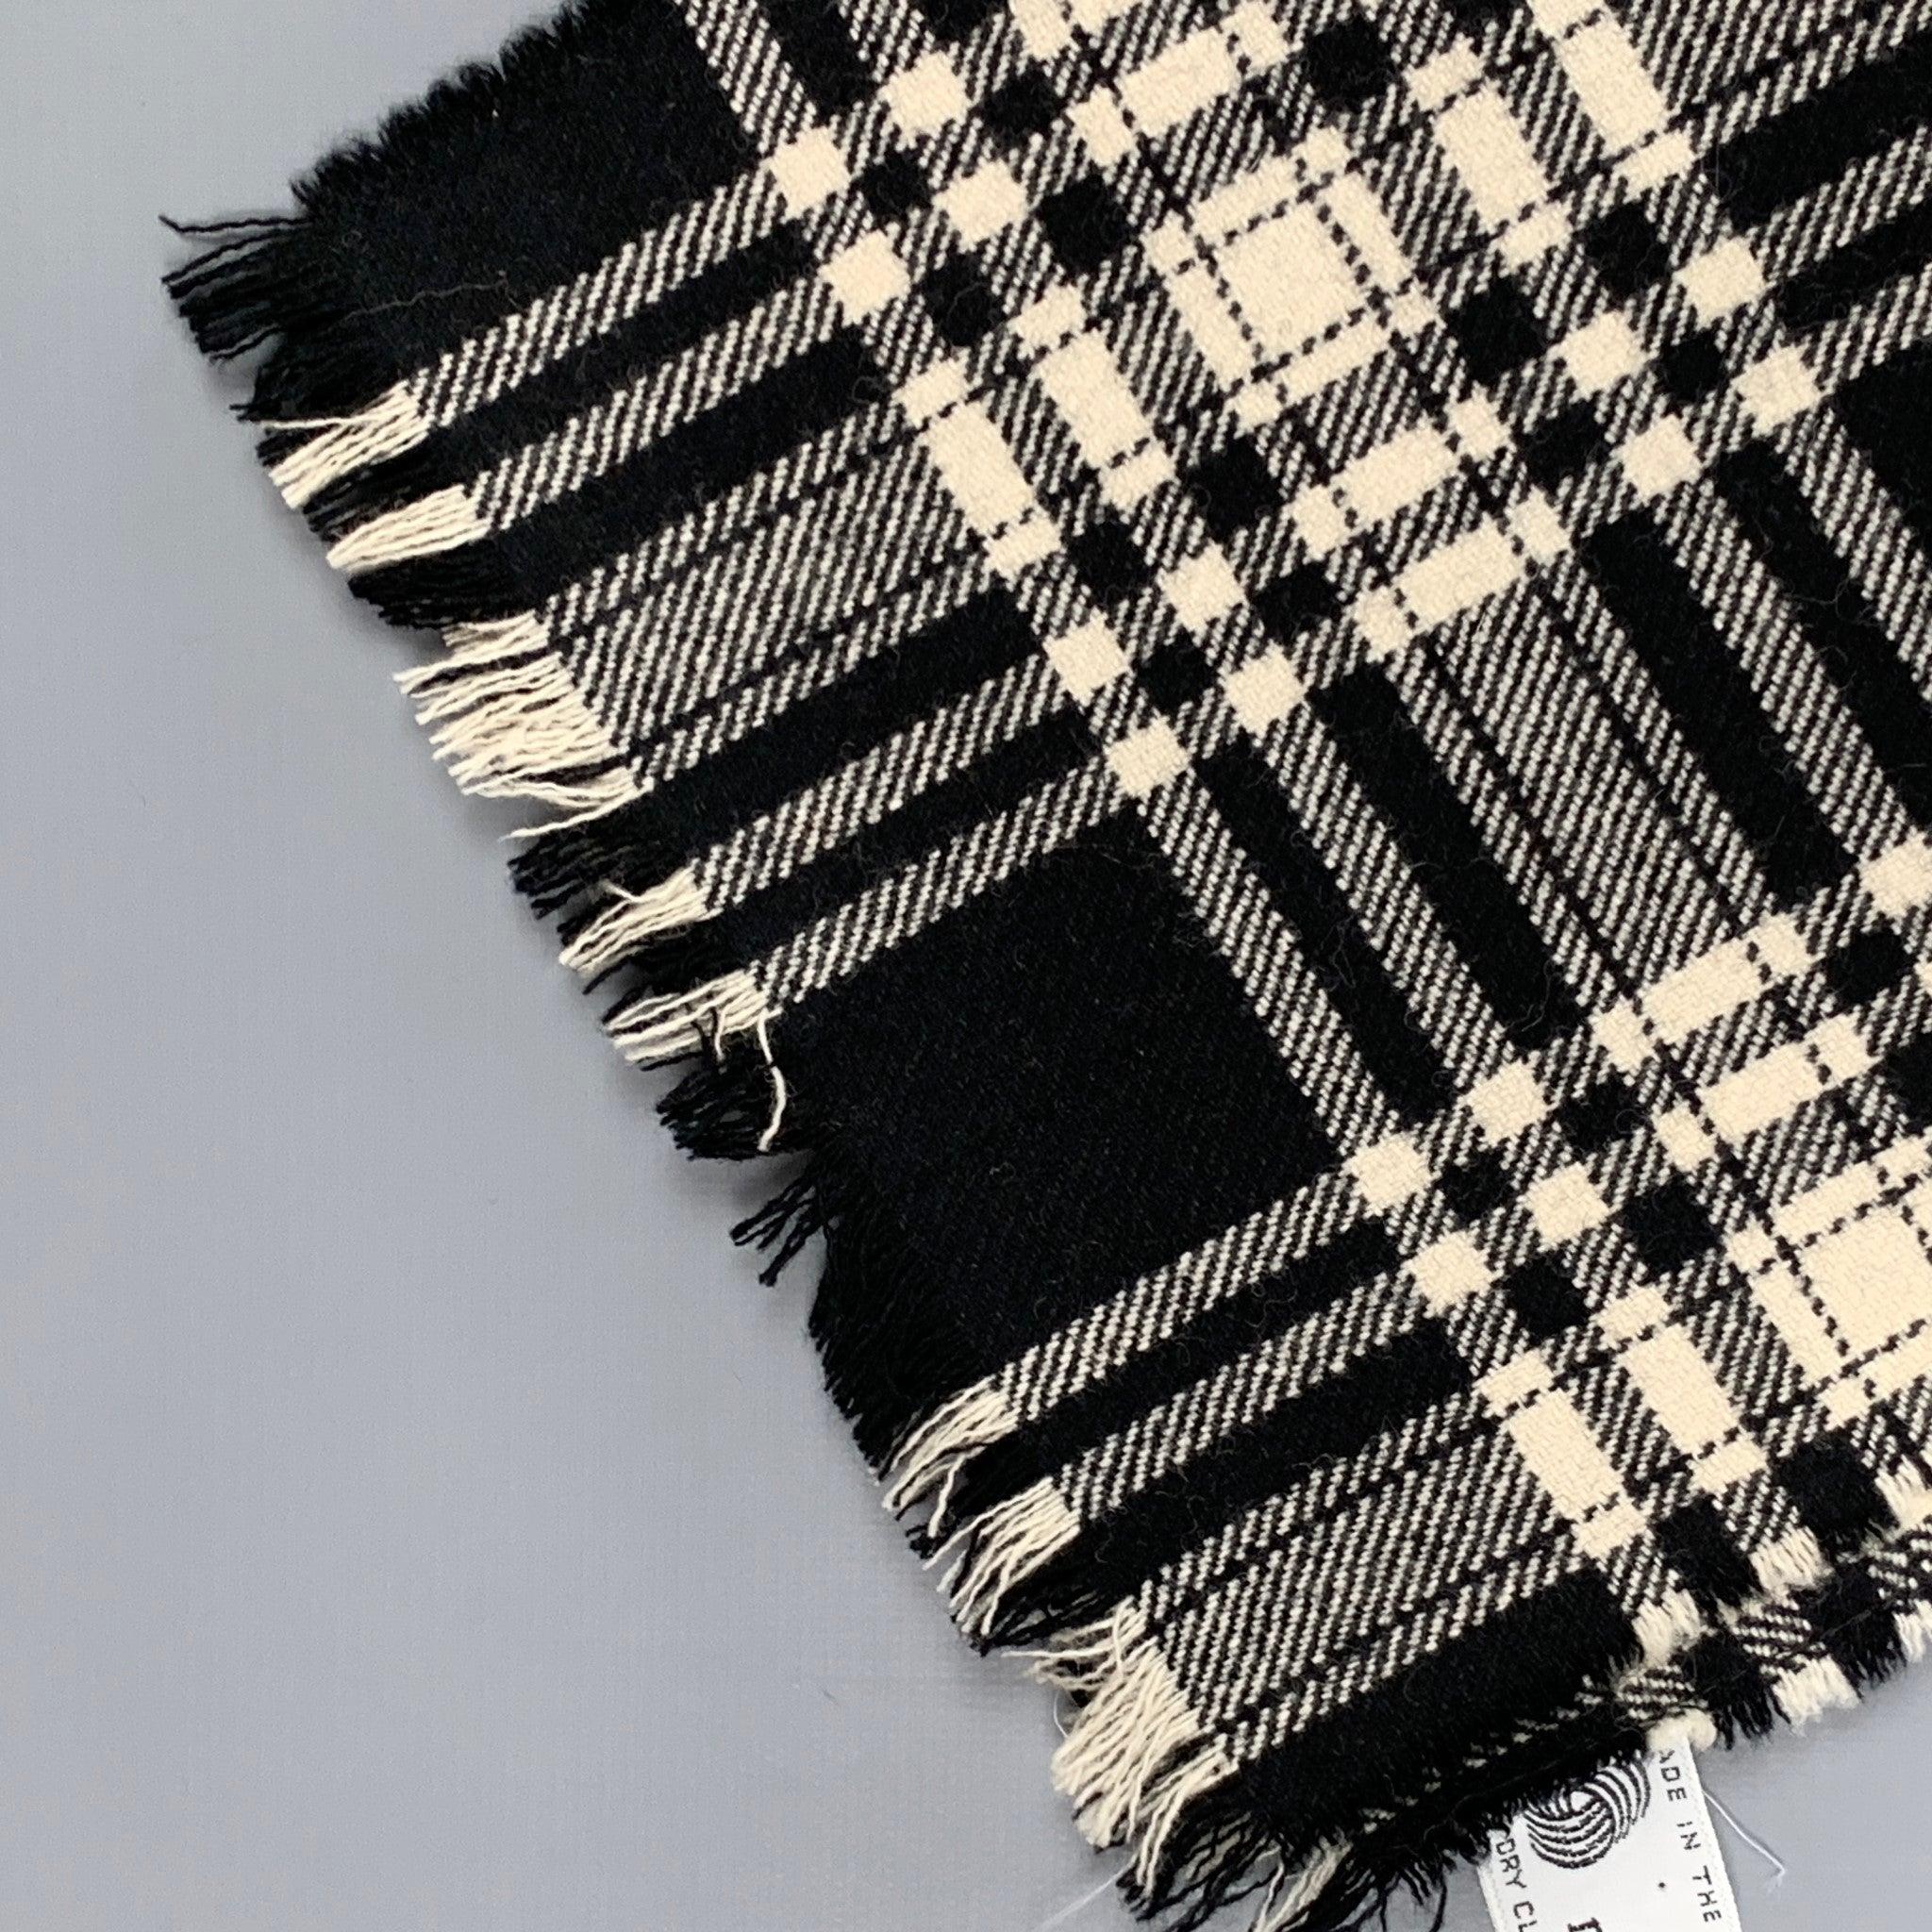 HARRODS scarf comes in a black & white plaid wool with a fringe trim.
Very Good
Pre-Owned Condition. 

Measurements: 
  
34 inches  x 8.25 inches 
  
  
 
Reference: 118711
Category: Scarves
More Details
    
Brand:  HARRODS
Color:  Black
Color 2: 